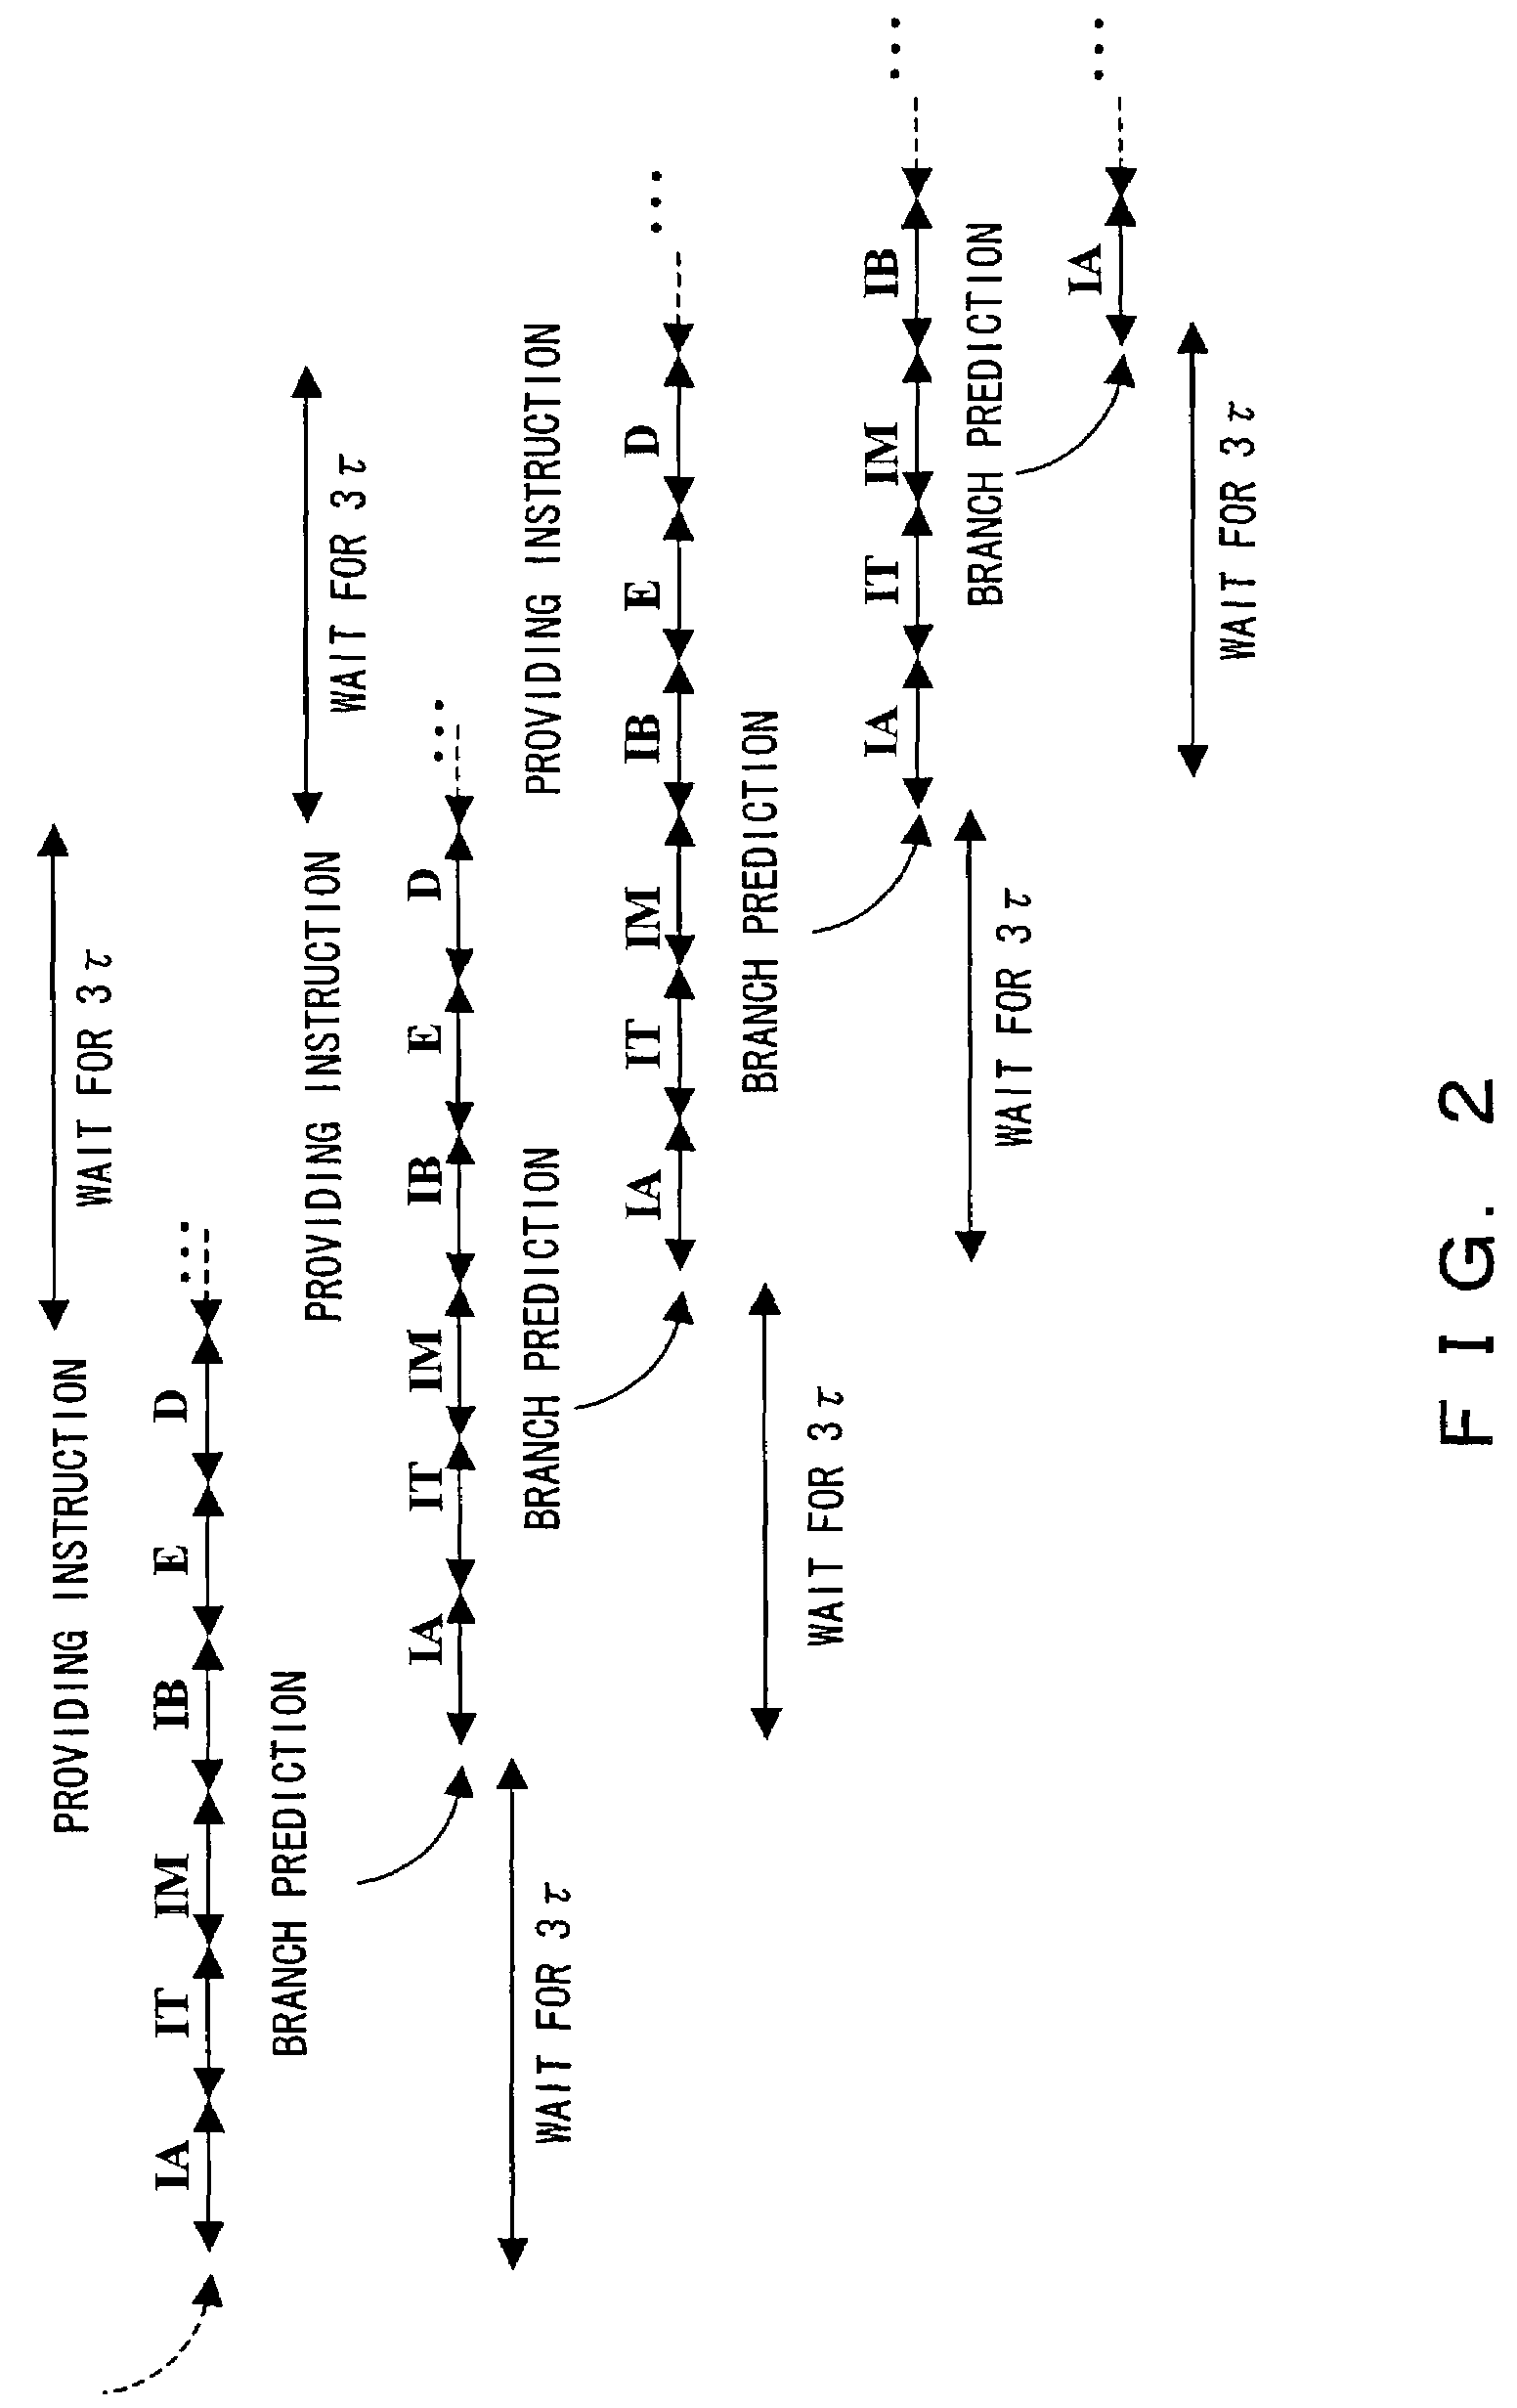 Apparatus for controlling instruction fetch reusing fetched instruction